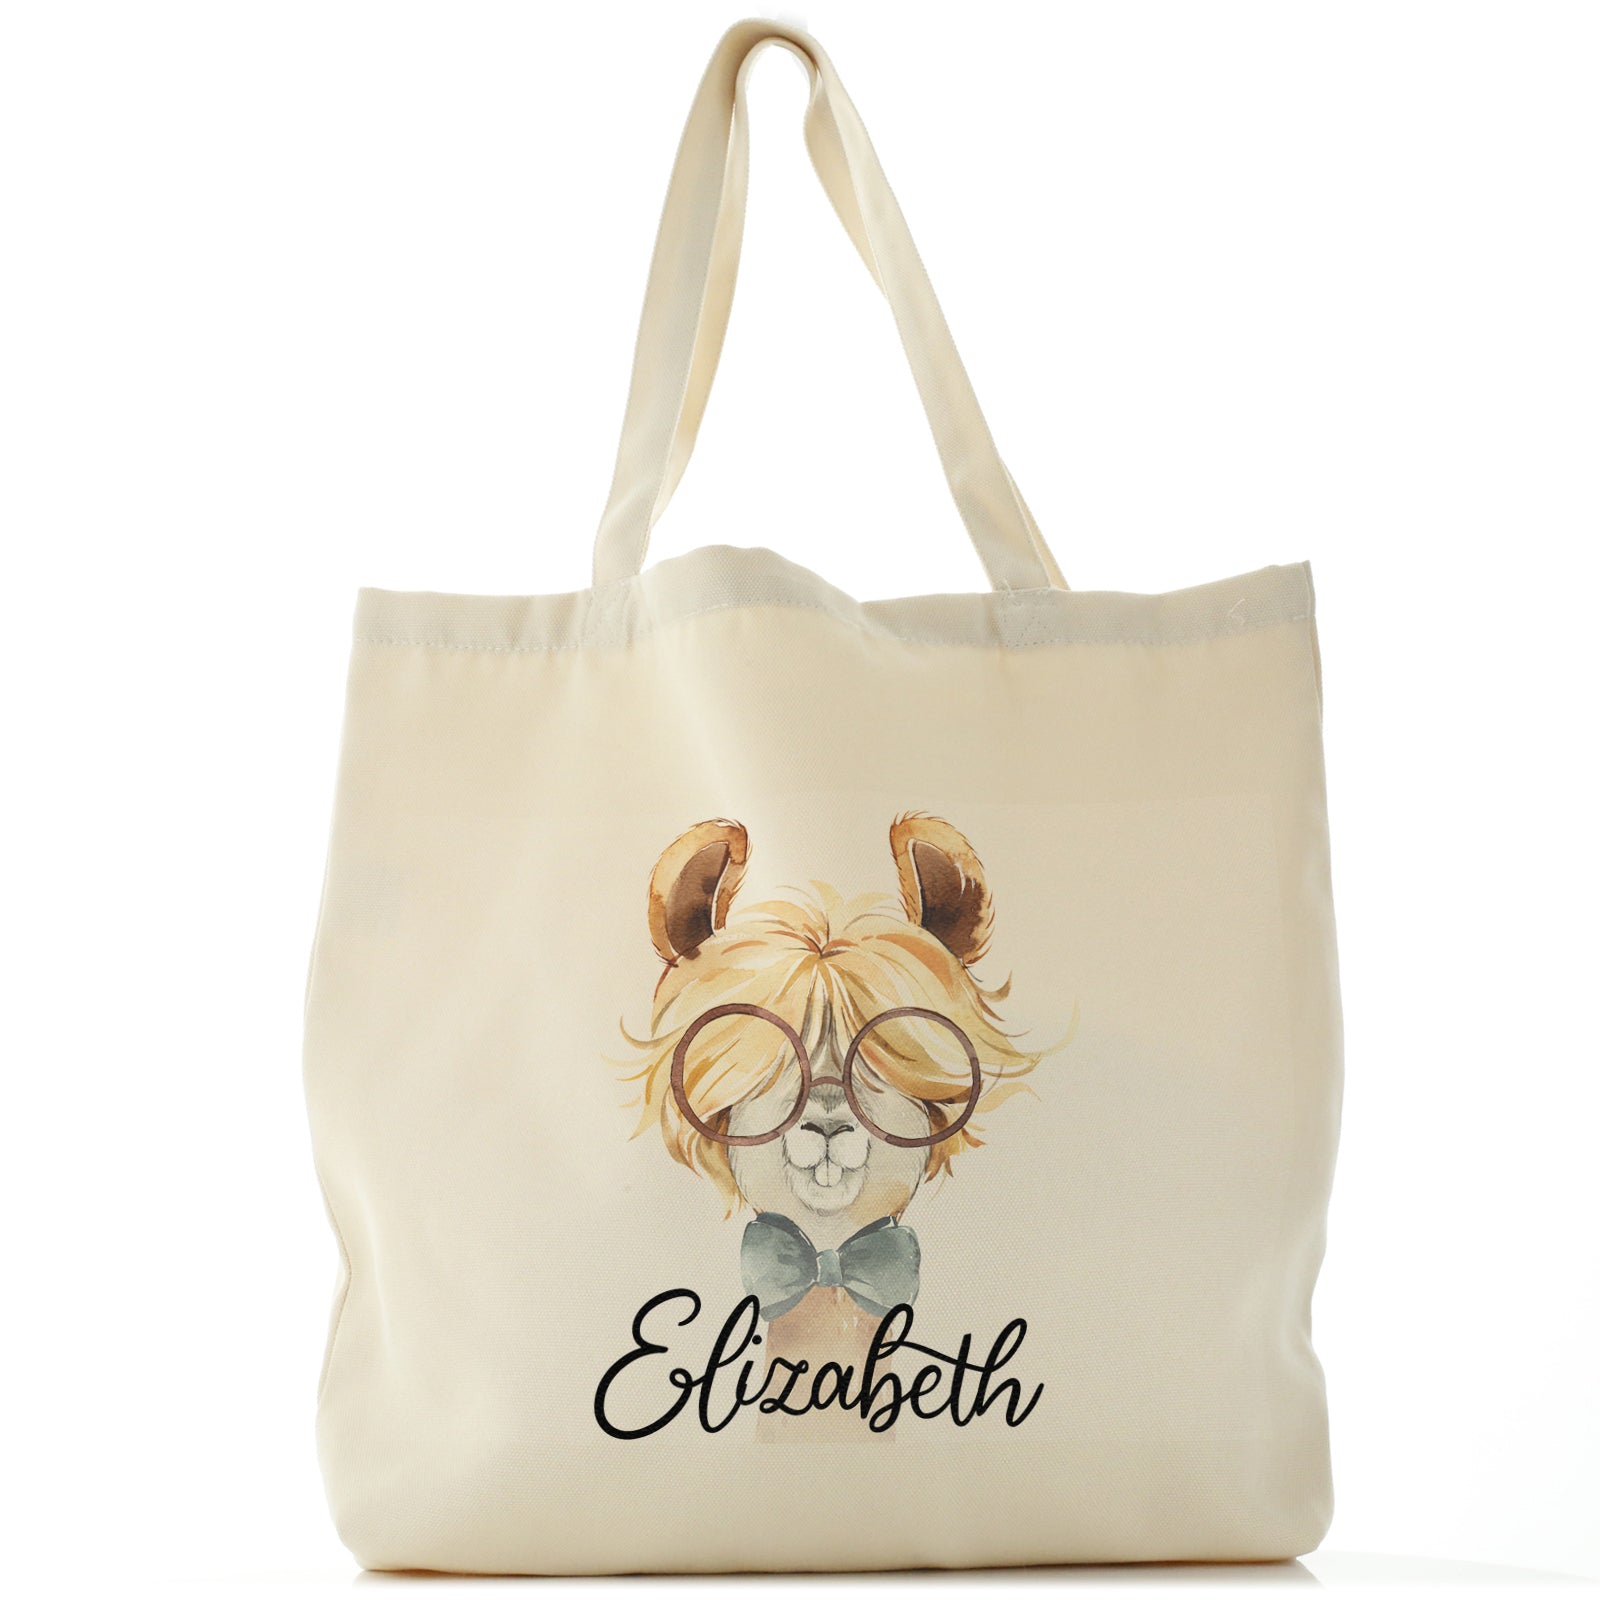 Personalised Canvas Tote Bag with Alpaca Bow Tie and Glasses and Cute Text